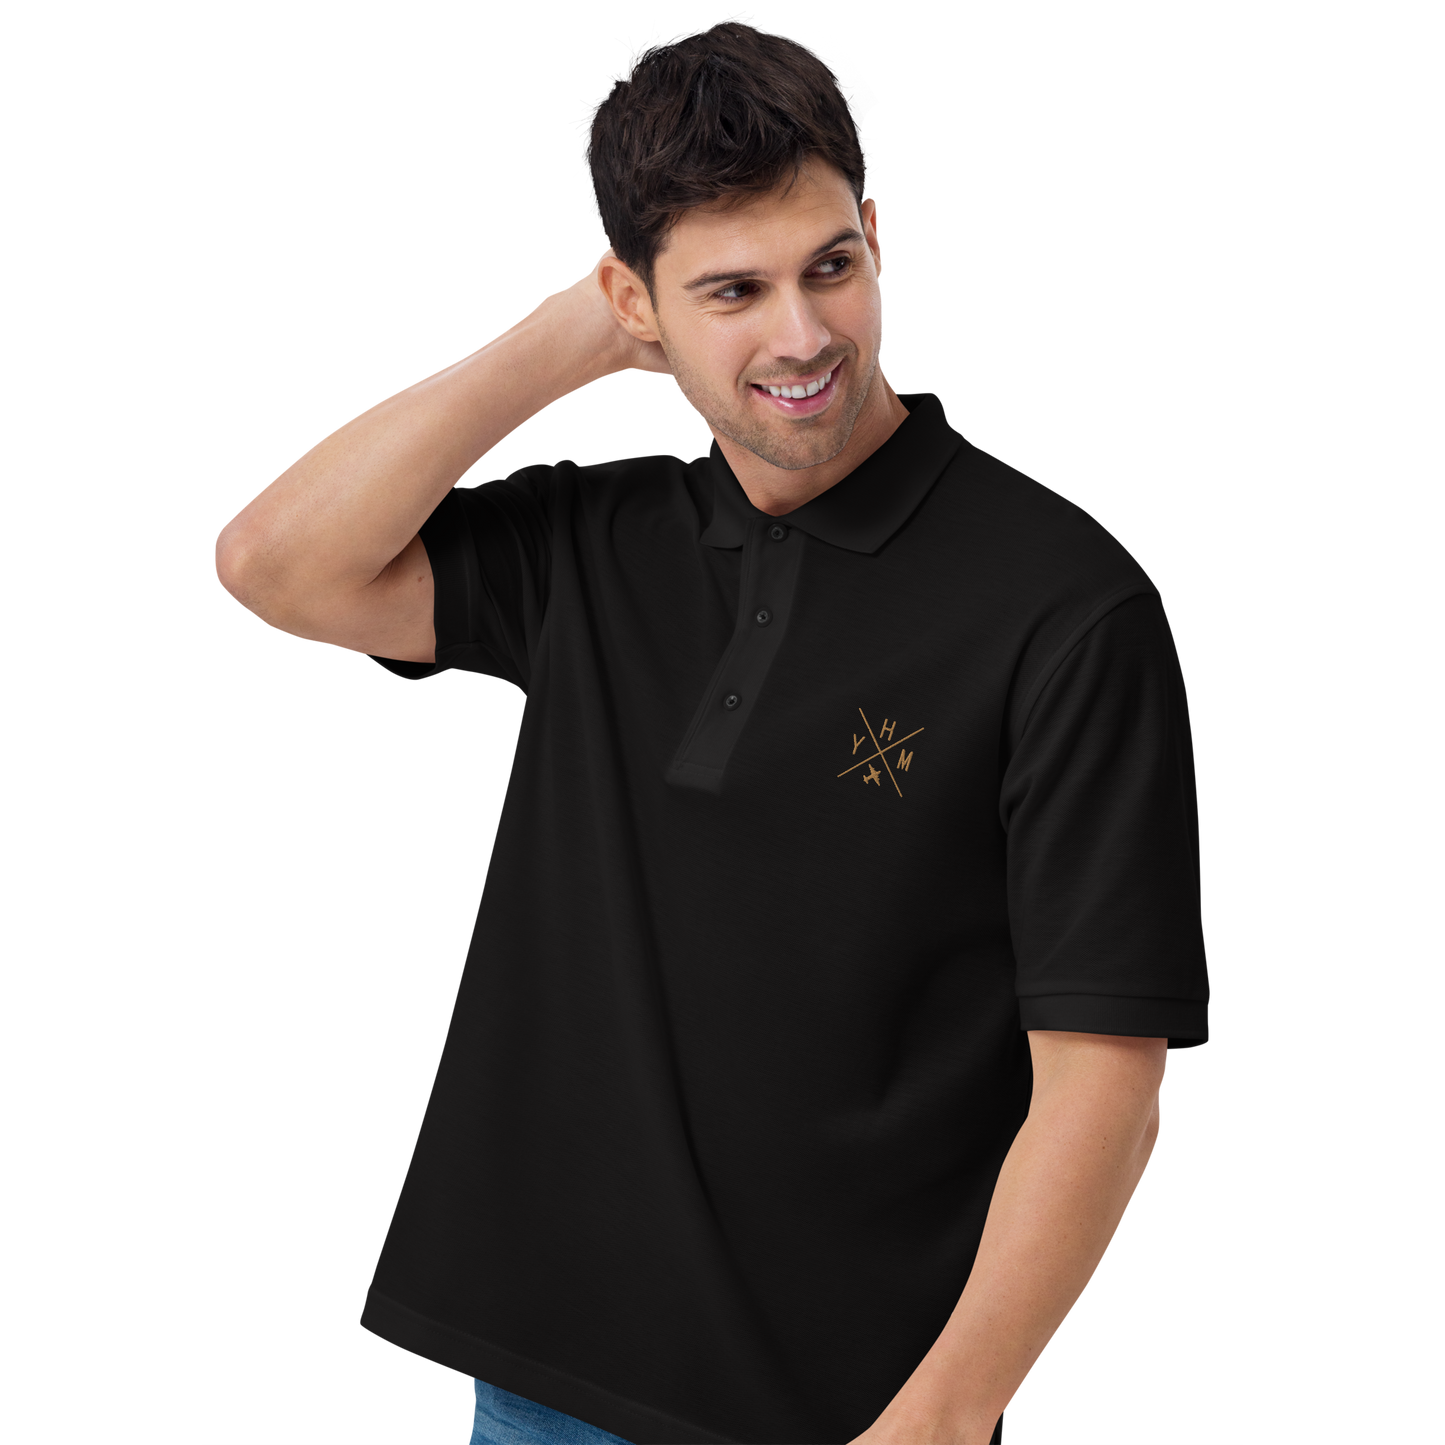 Crossed-X Men's Premium Polo • Old Gold Embroidery